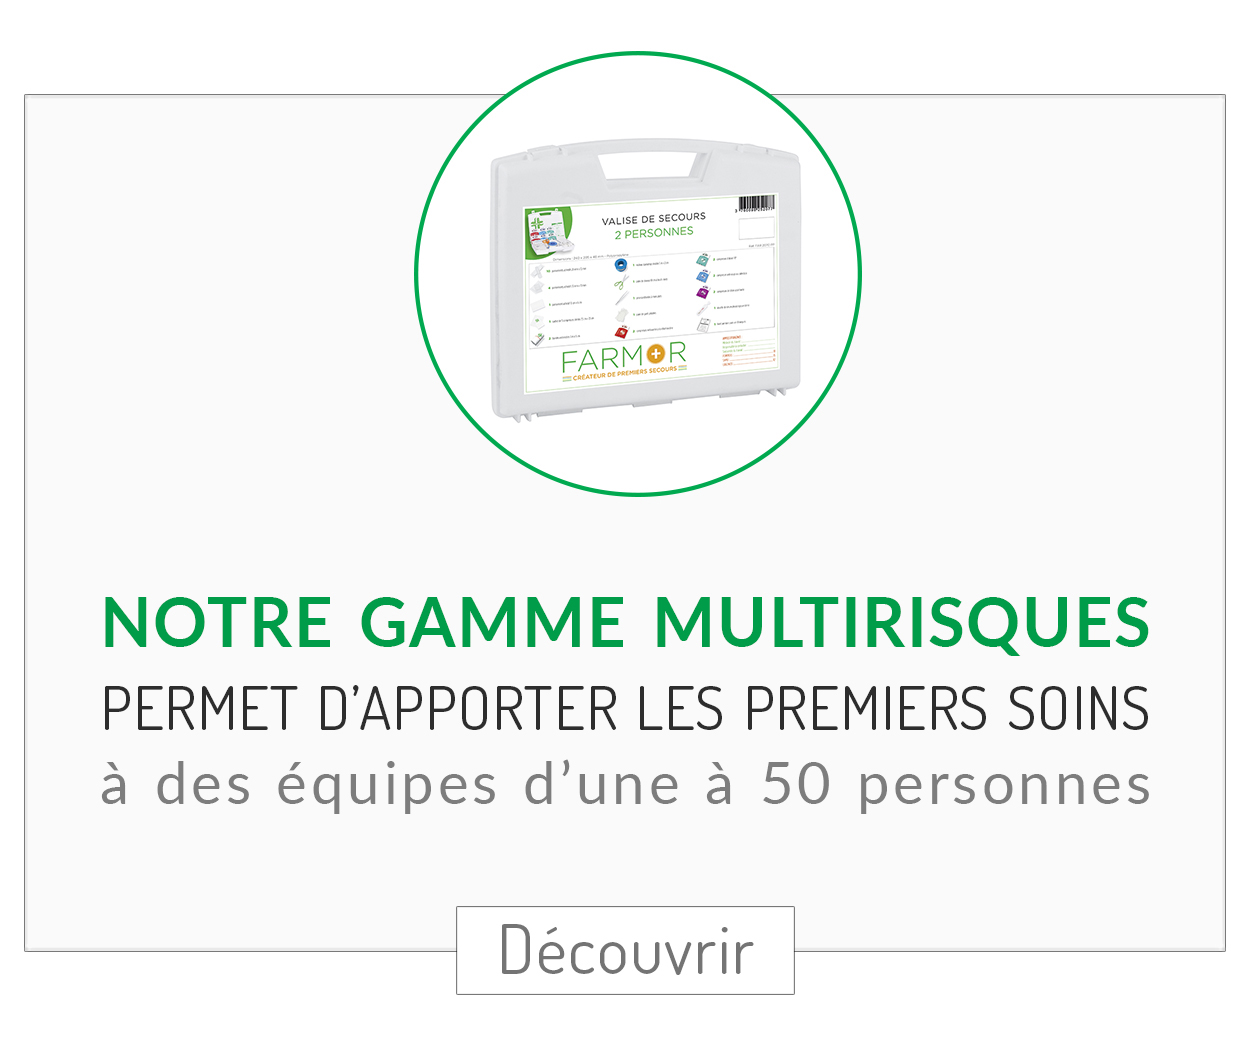 Gamme multirisques